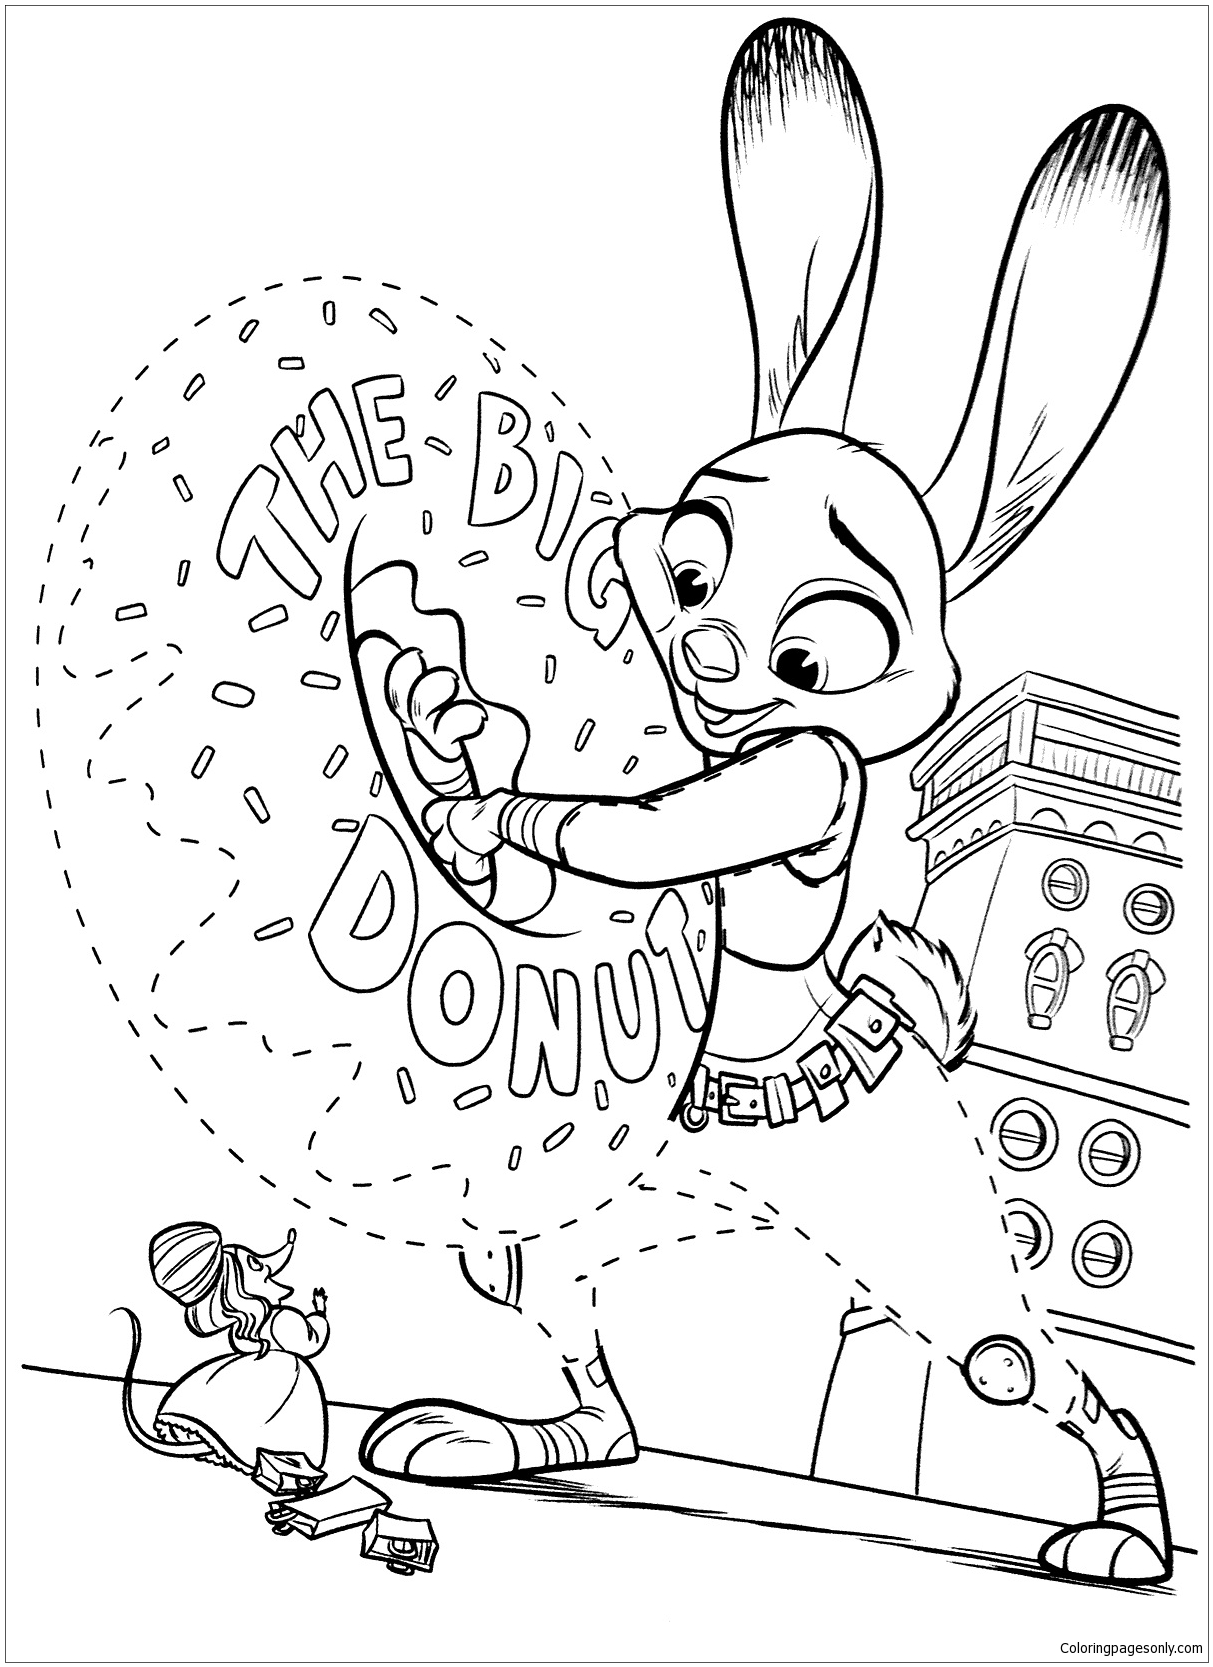 Zootopia - Image 10 Coloring Pages